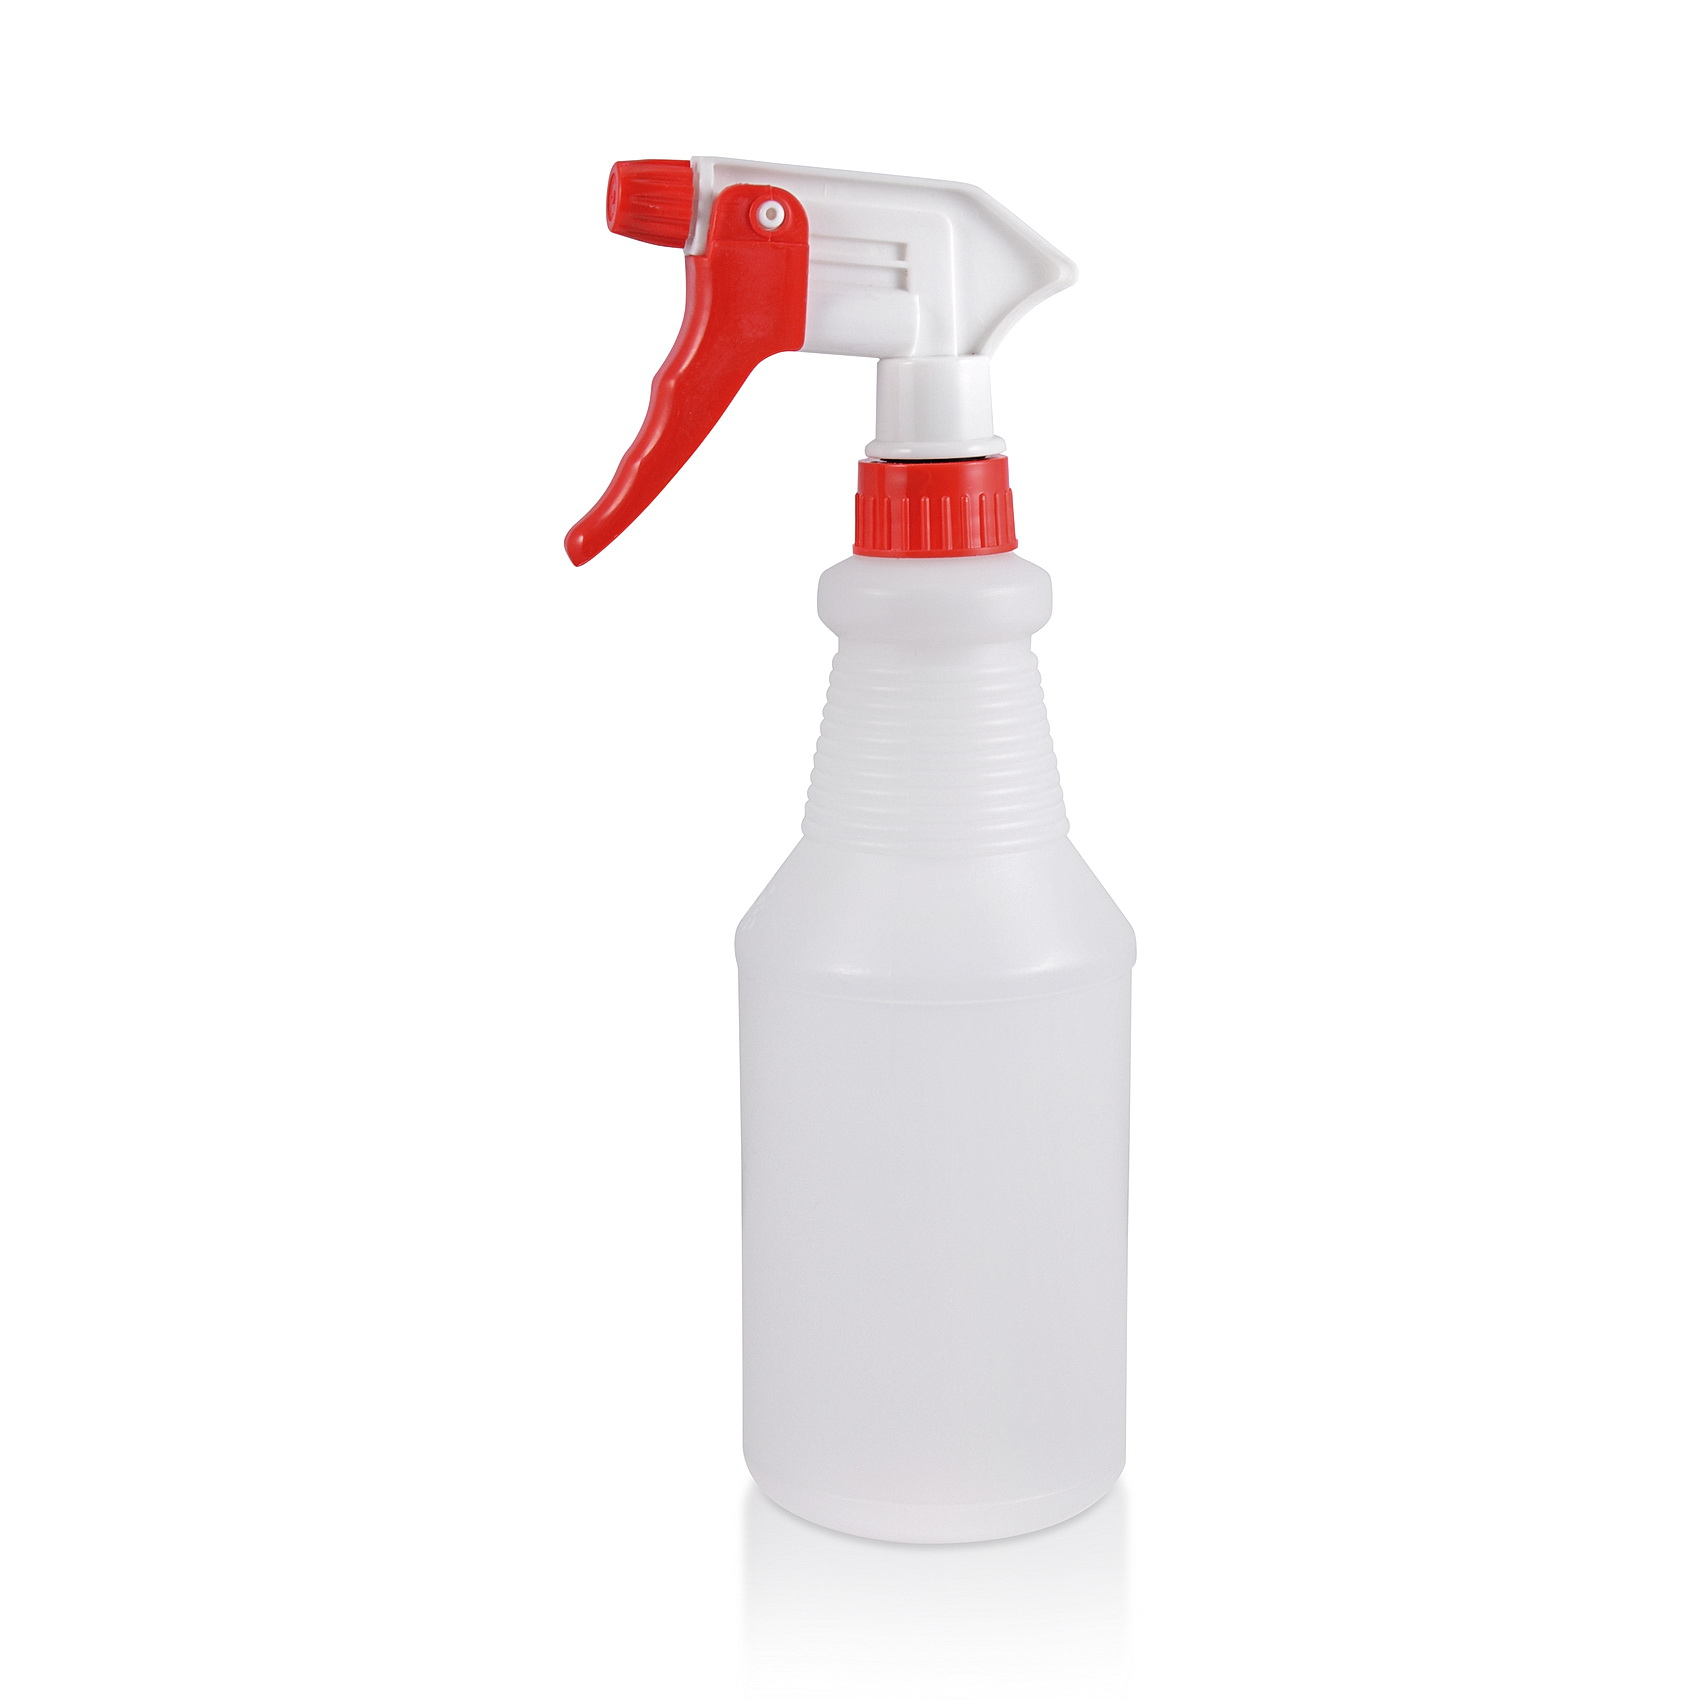 24 oz Clear Commercial-Grade Spray Bottle with Ajustable Spray Settings